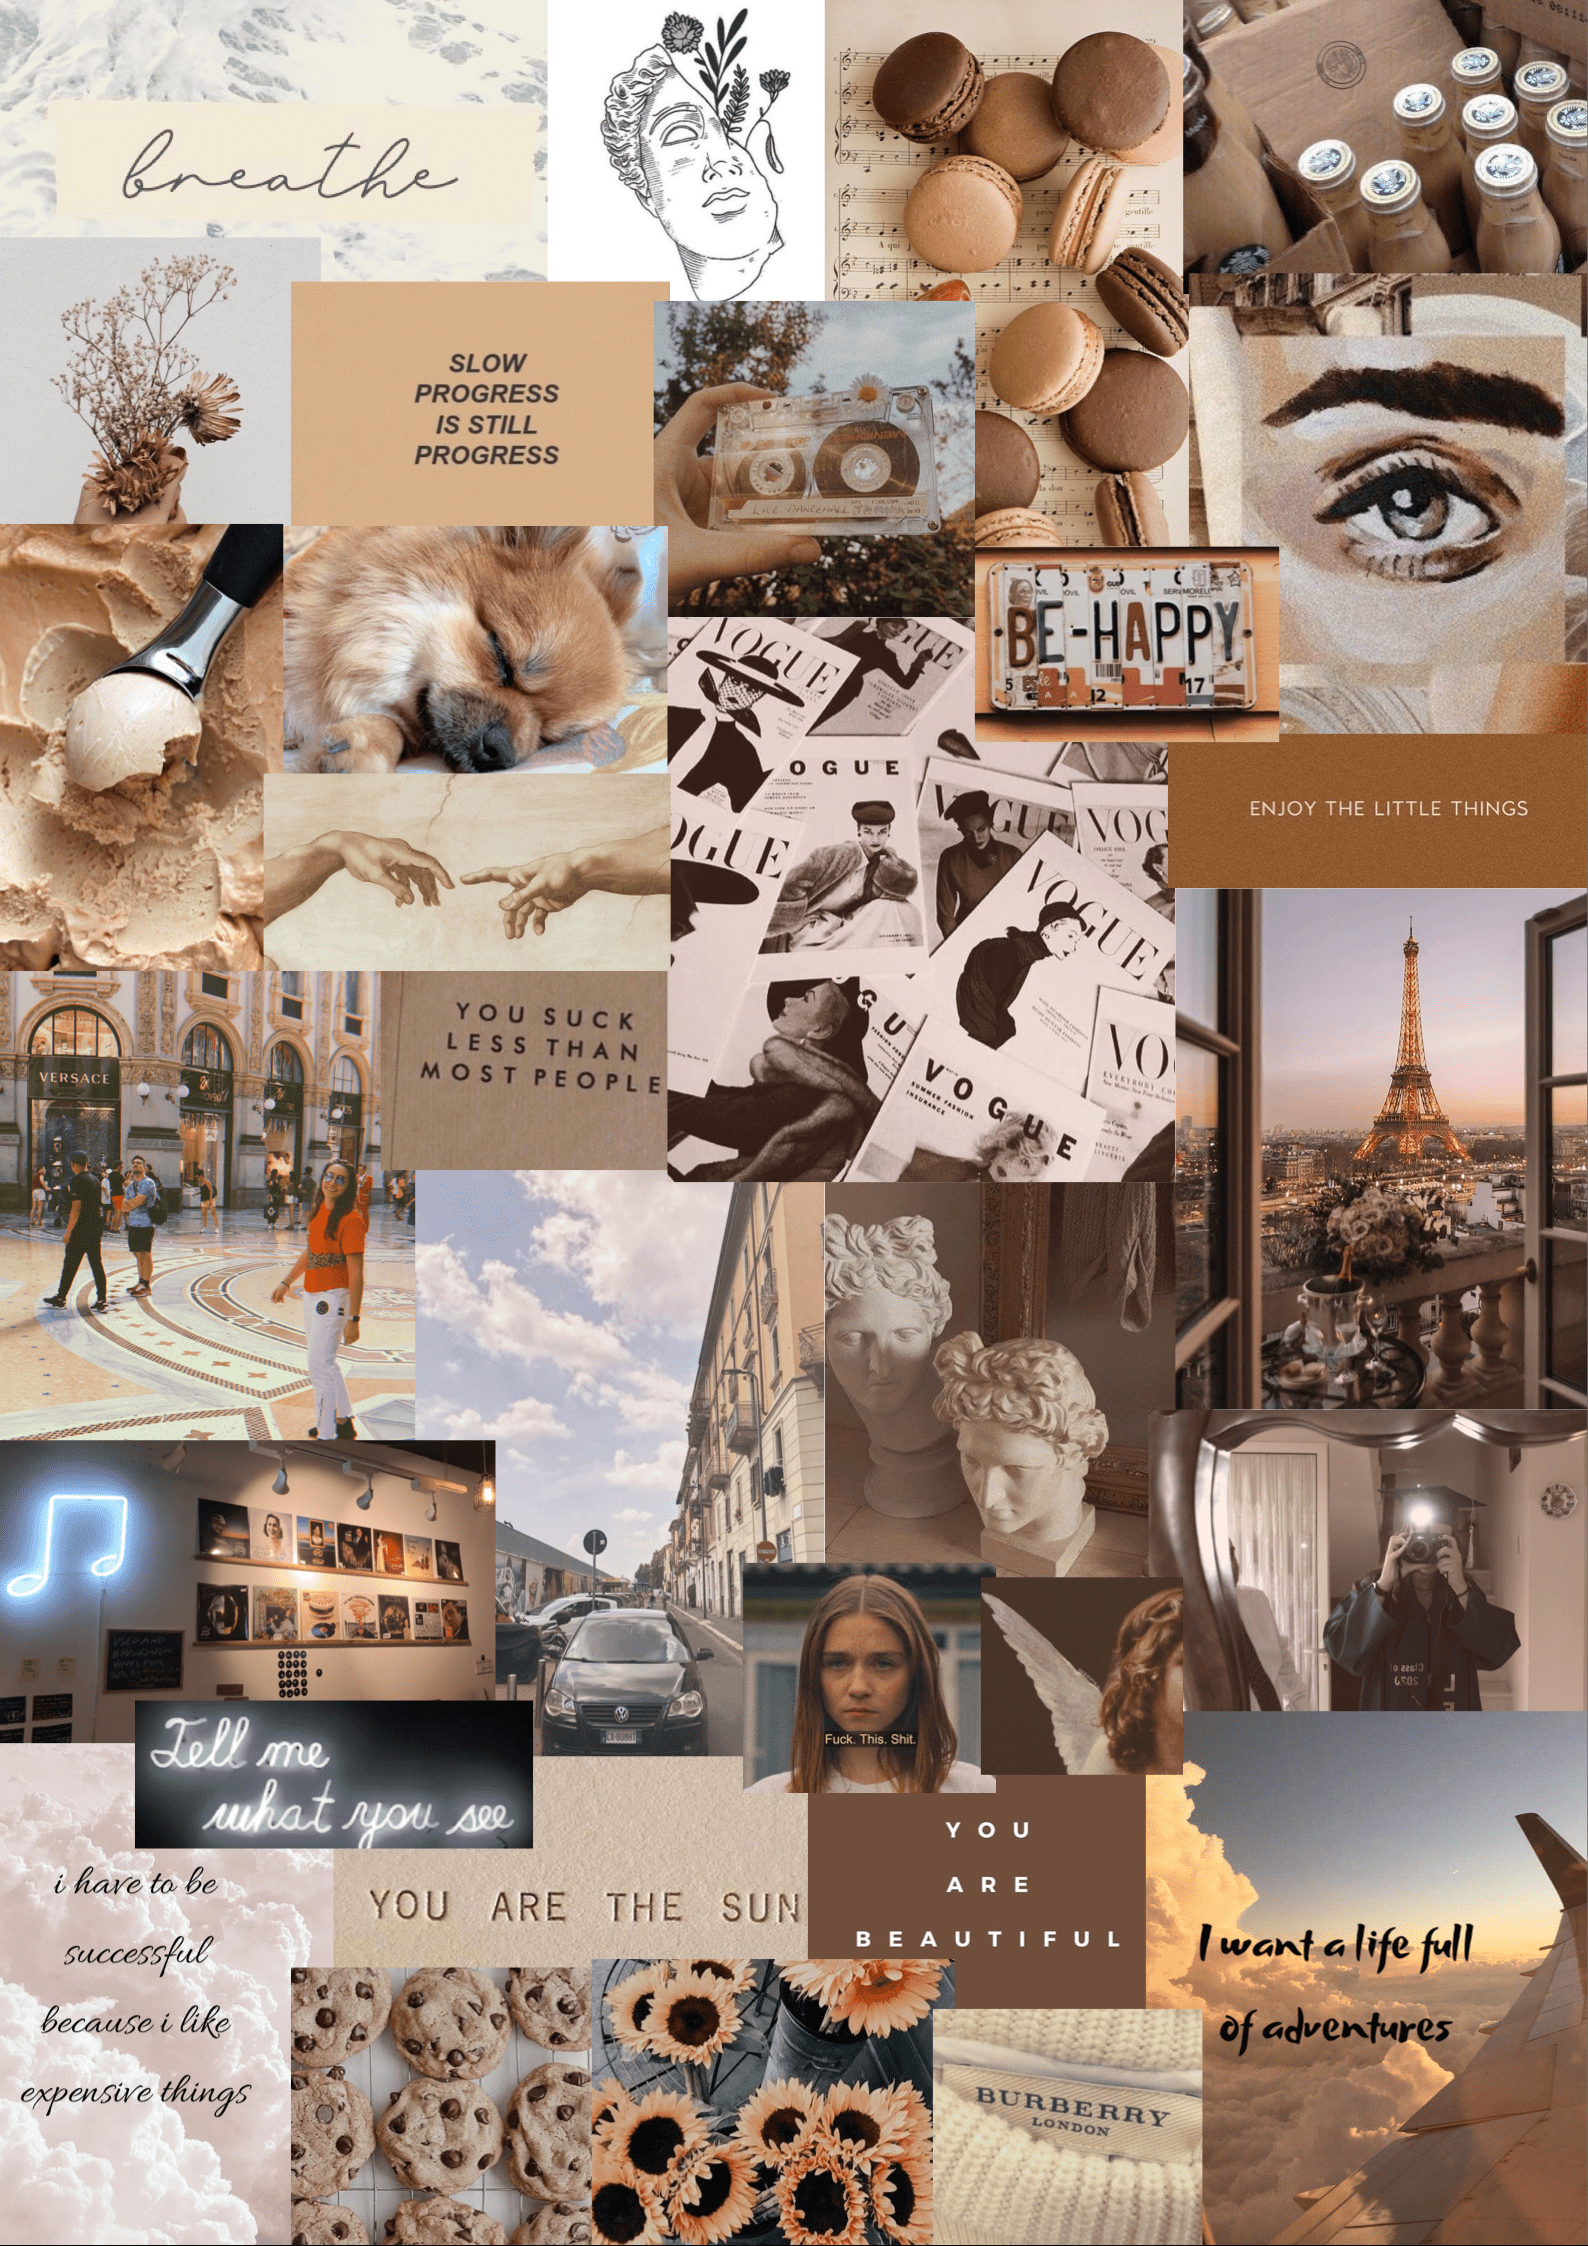 Aesthetic wallpaper collage. Aesthetic iphone wallpaper, Vision board wallpaper, You are